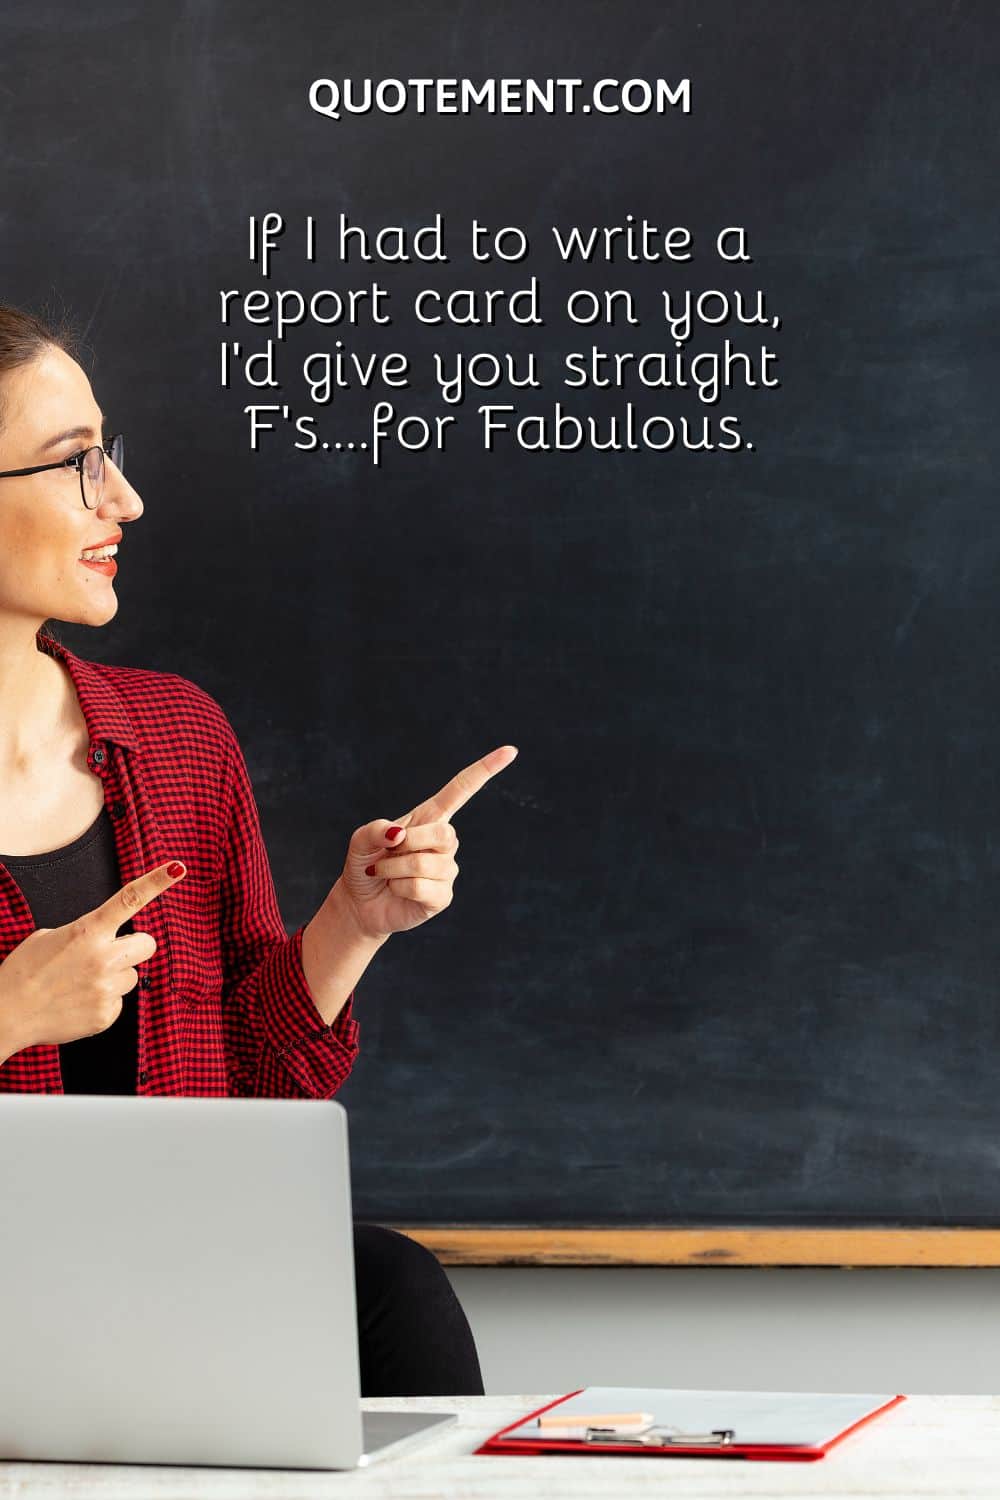 If I had to write a report card on you, I’d give you straight F’s….for Fabulous